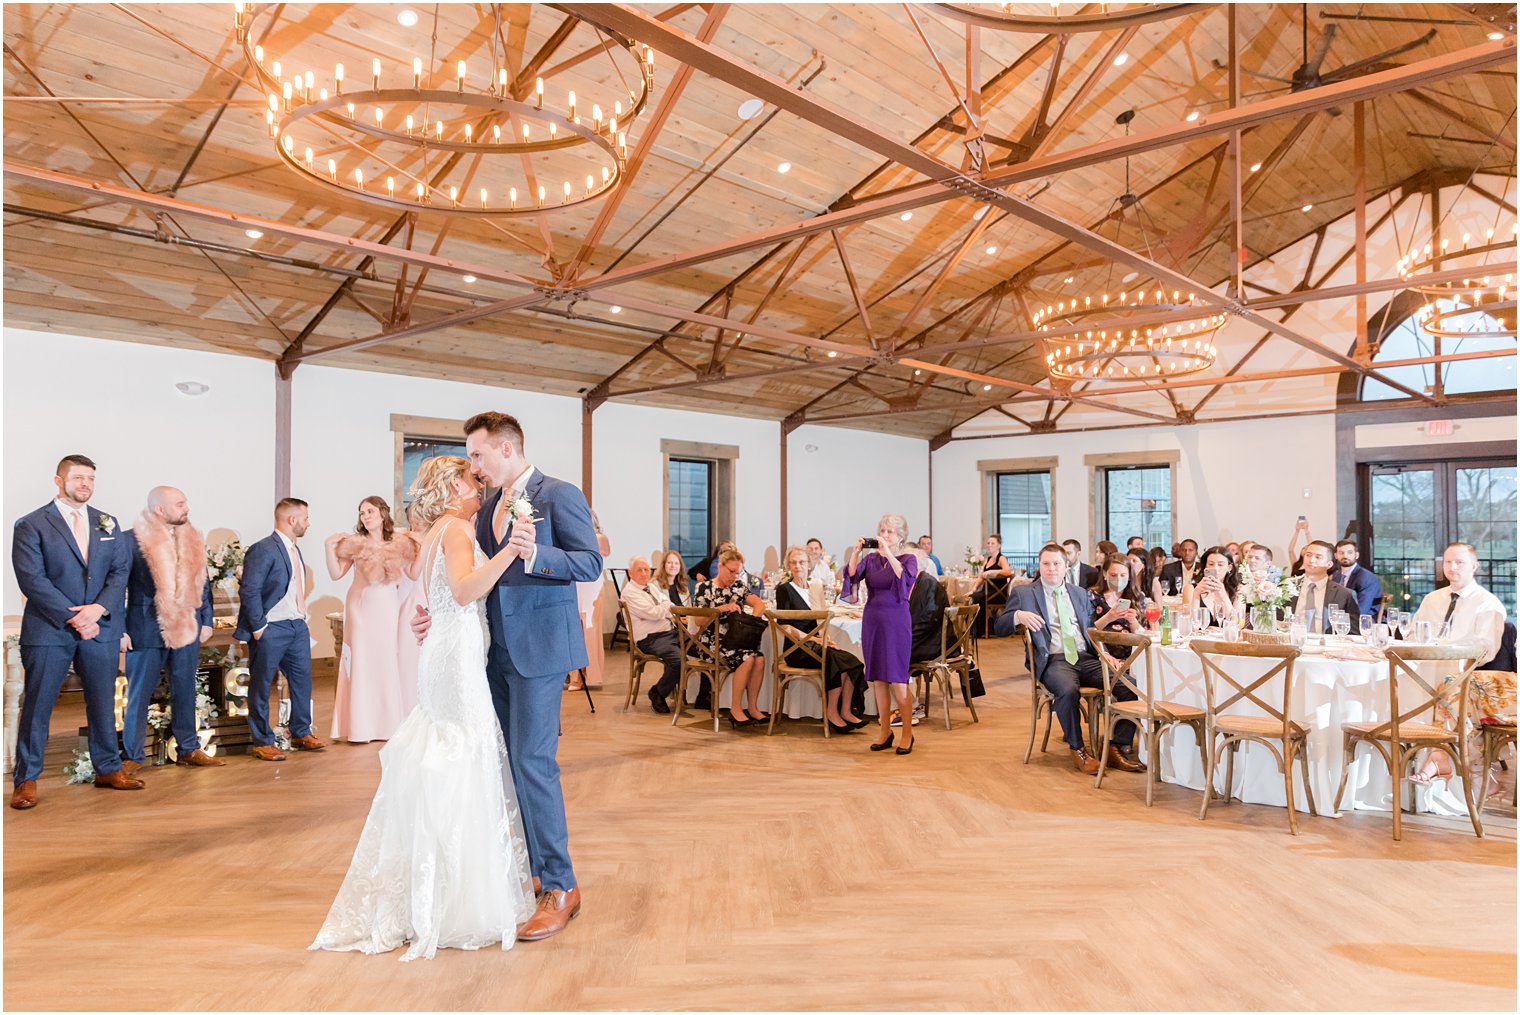 bride and groom dancing during rustic wedding reception in Vineyard Ballroom at Renault Winery South Jersey Venue in Egg Harbor Township NJ